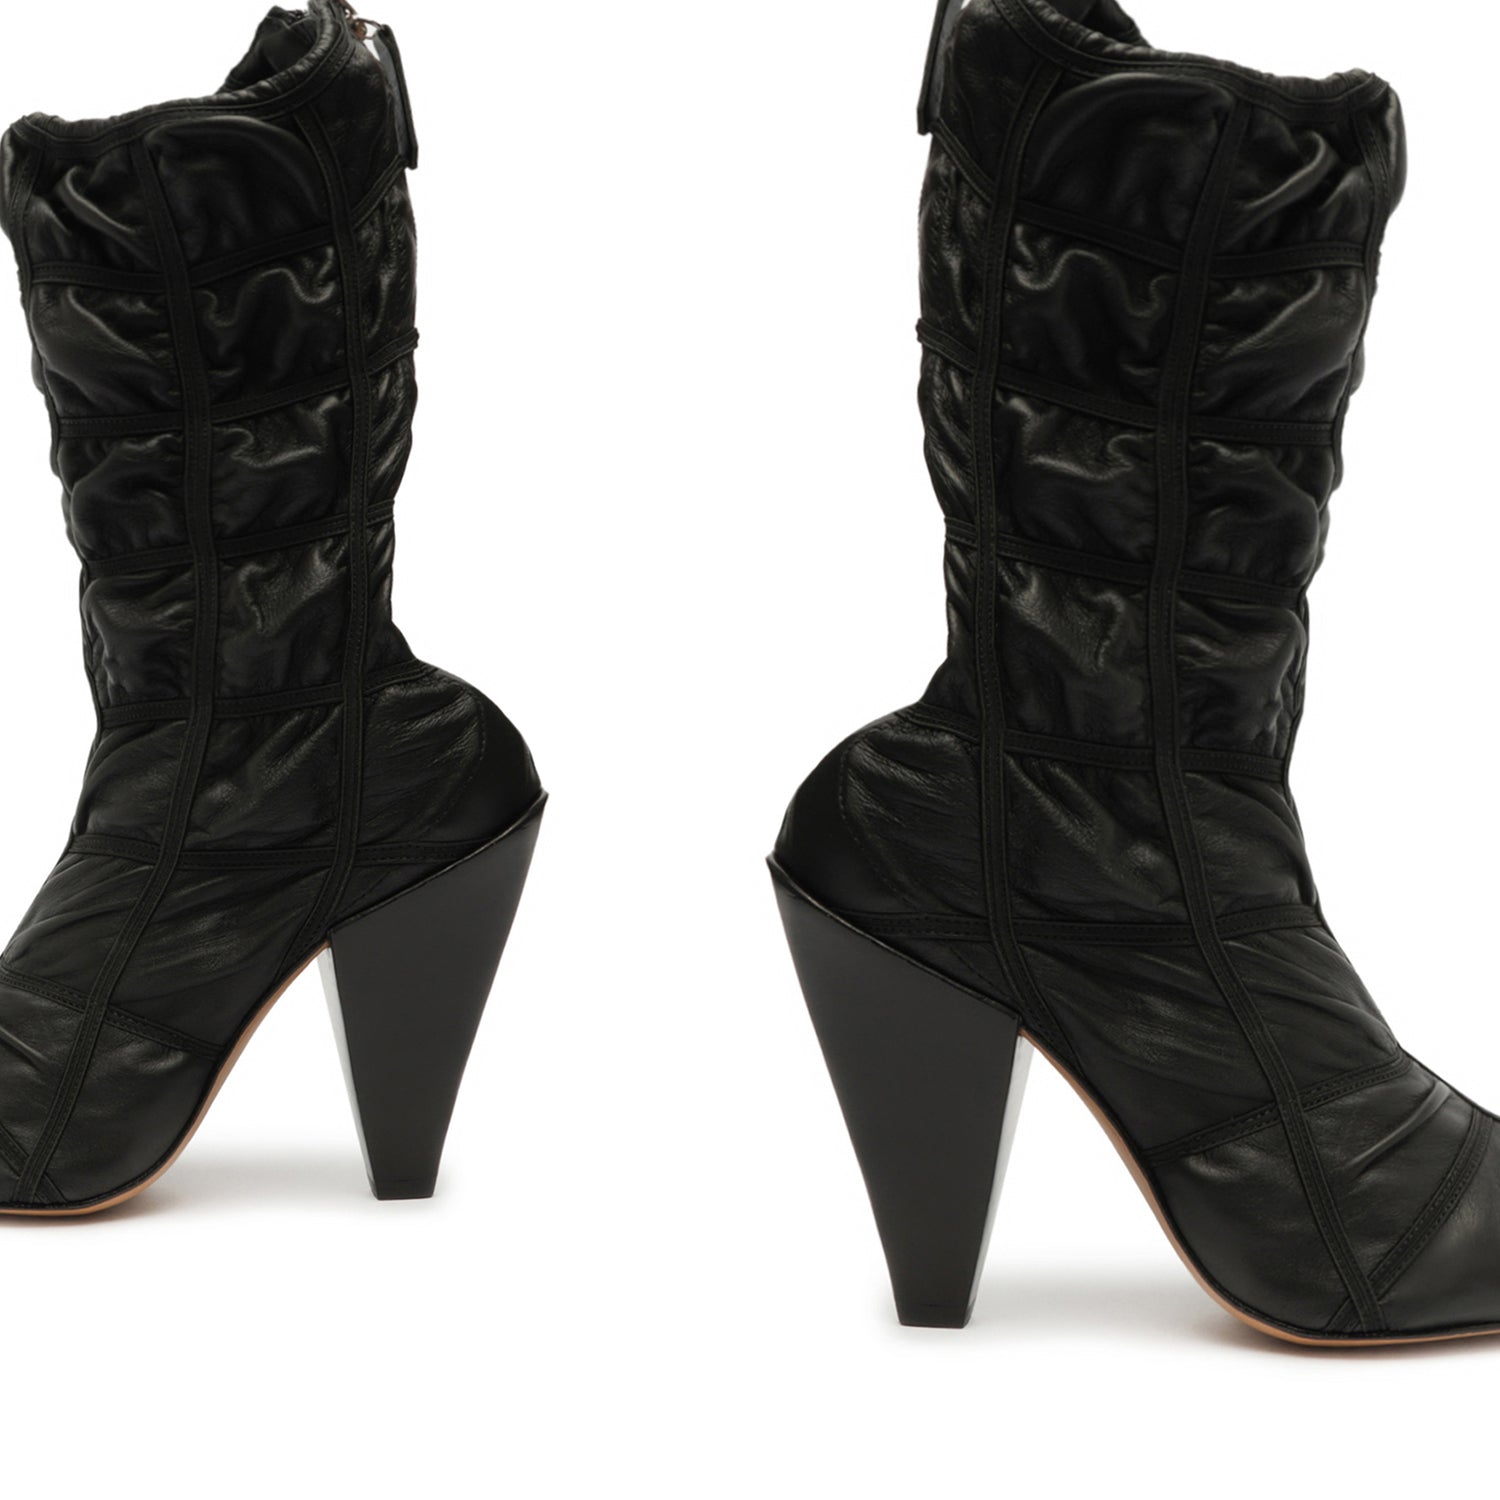 Lynelle Stretch Bootie Booties Fall 23    - Schutz Shoes